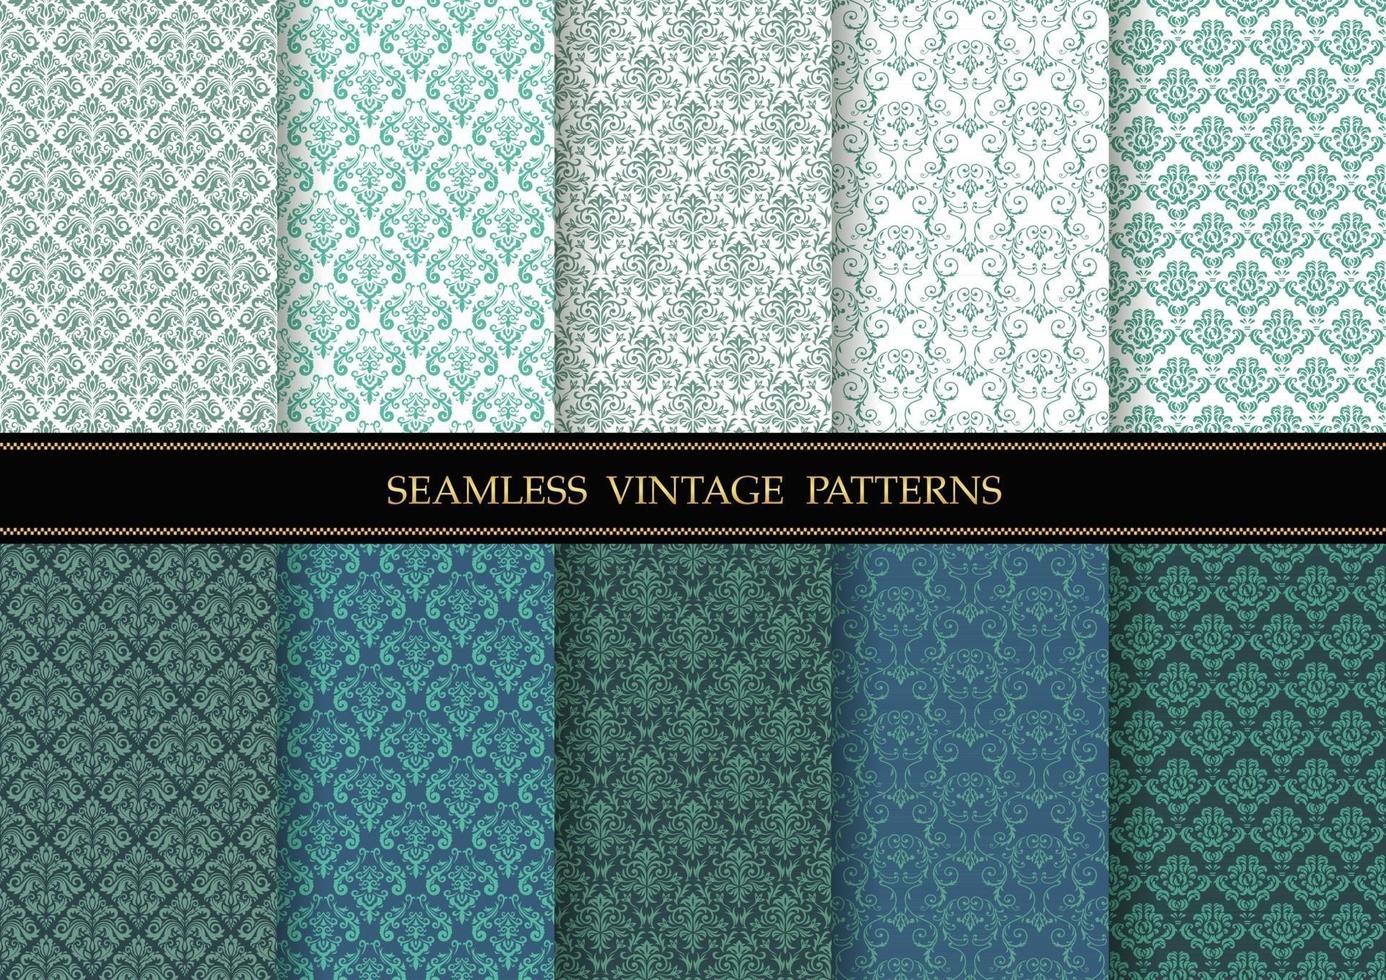 Horizontally And Vertically Repeatable Vector Seamless Damask Vintage  Patterns Set